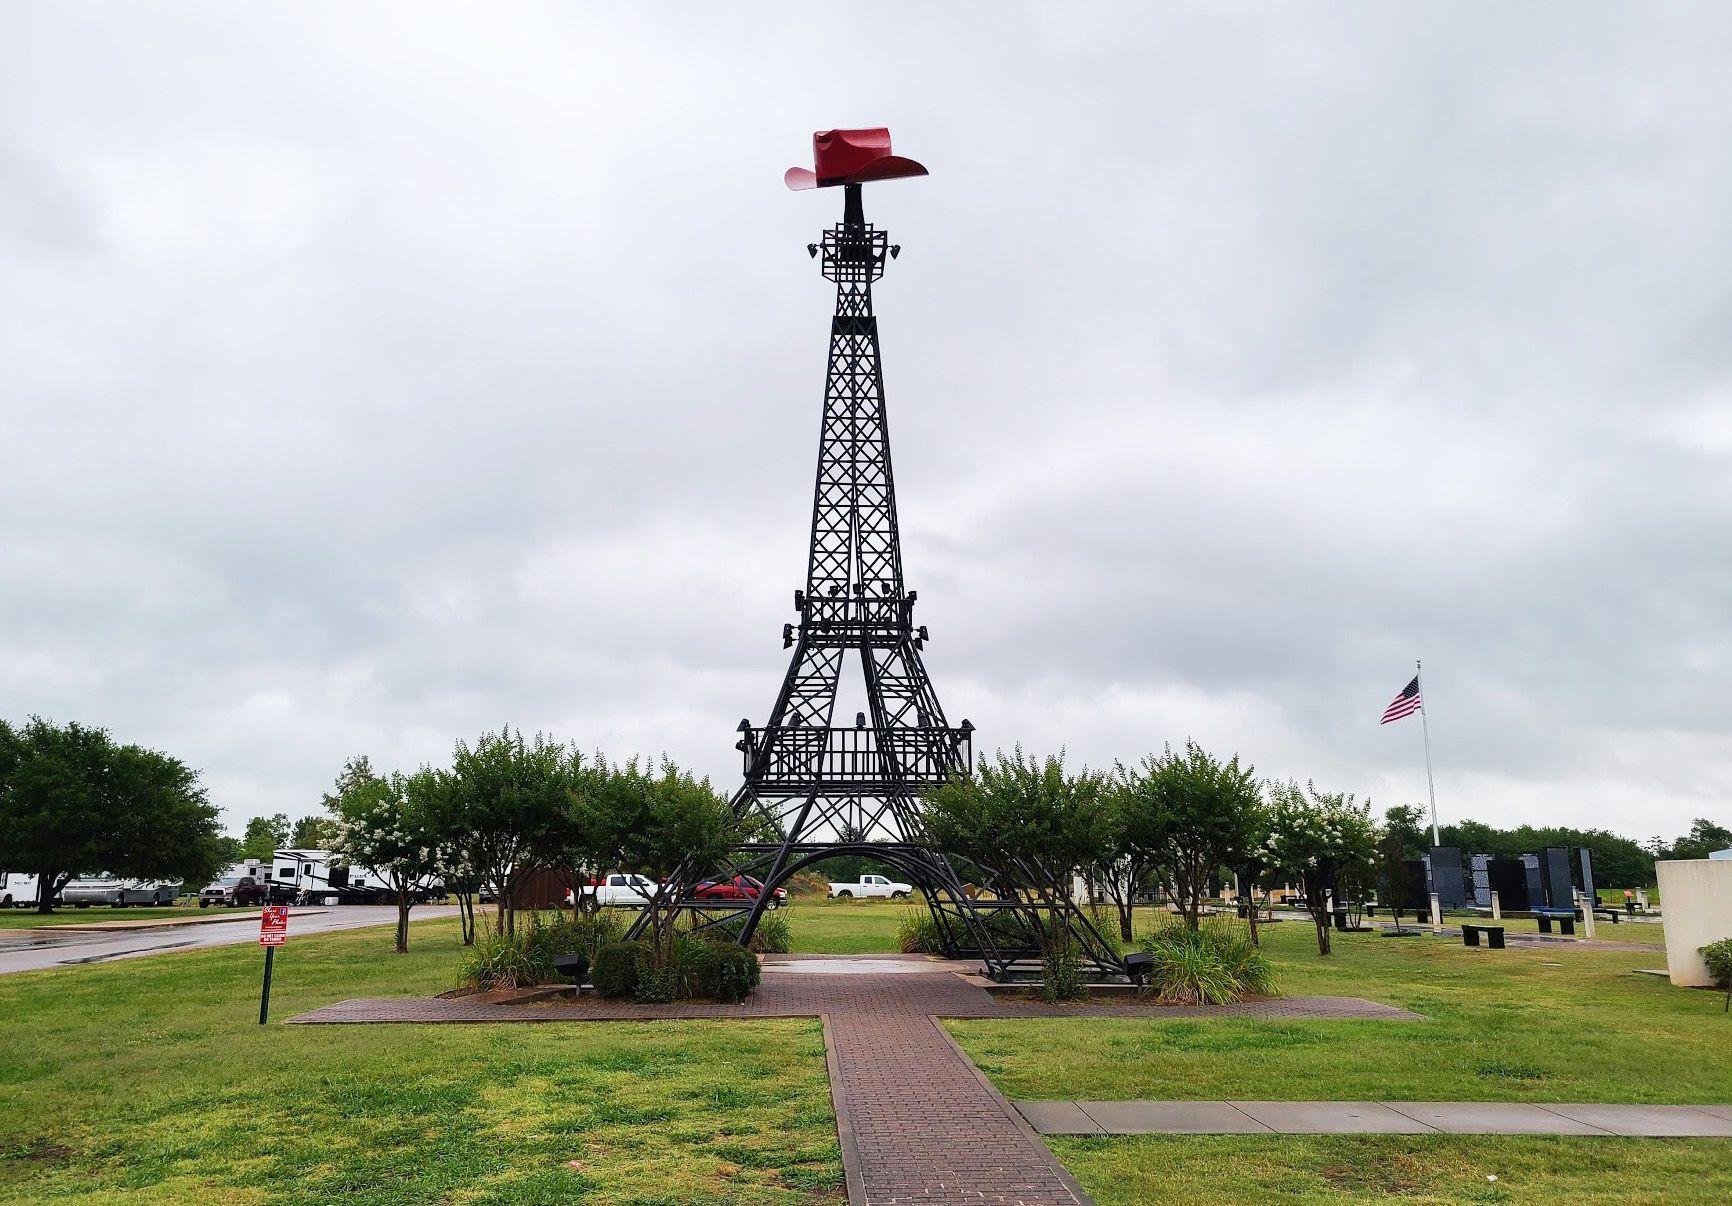 An eiffel tower replica with a red cowboy hat at the top.